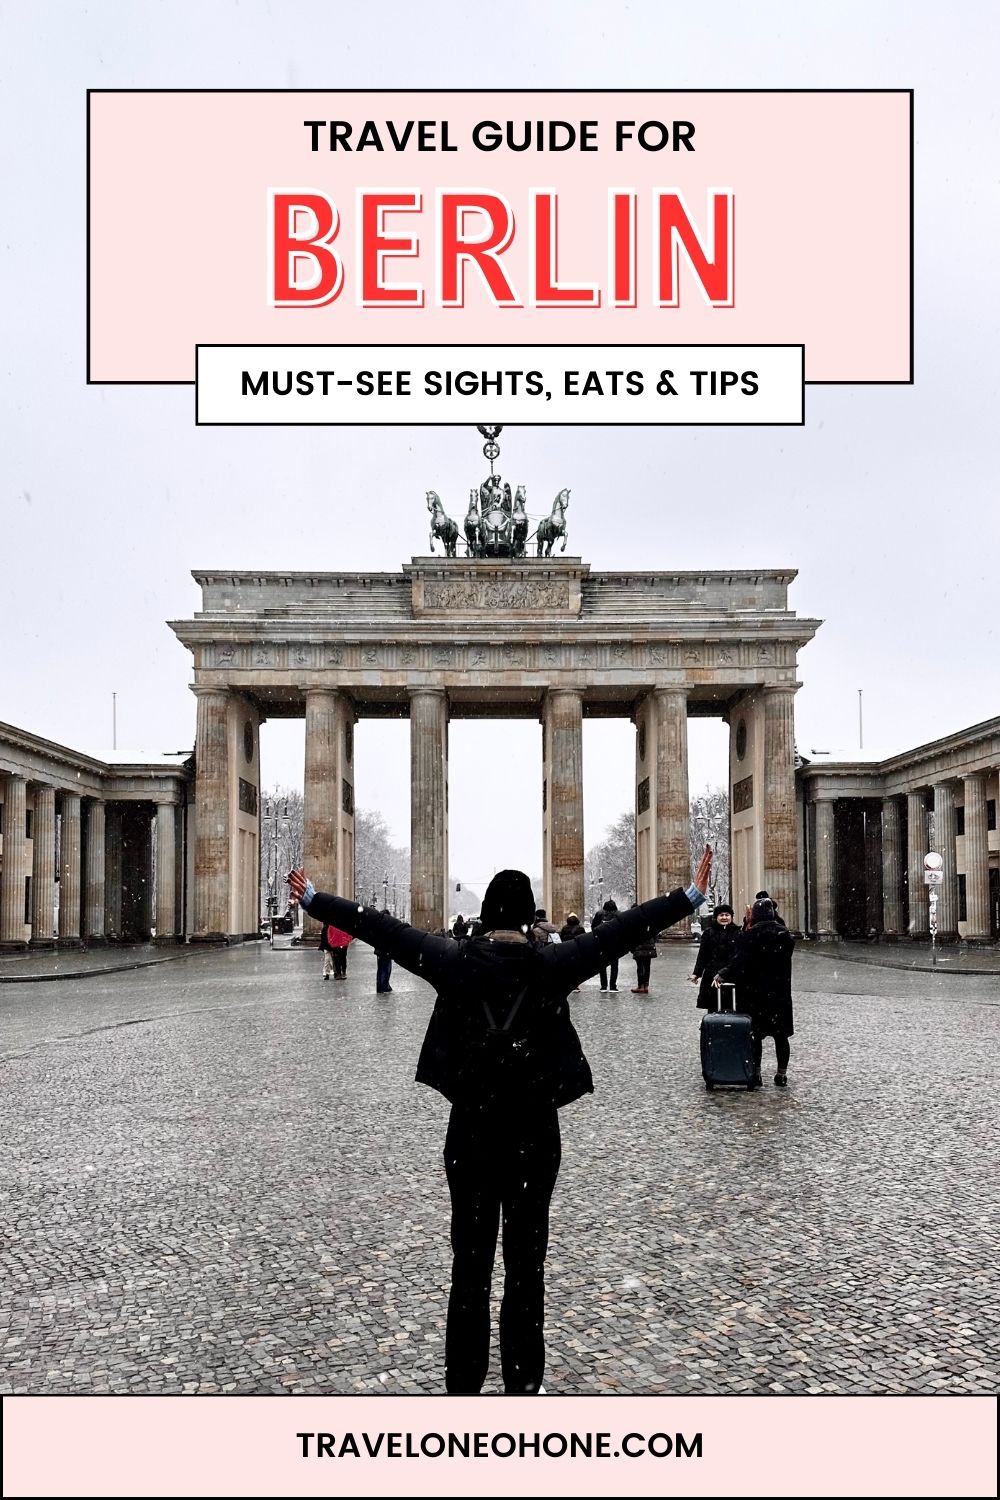 Berlin travel guide: What to see, do and eat in Berlin, Germany!